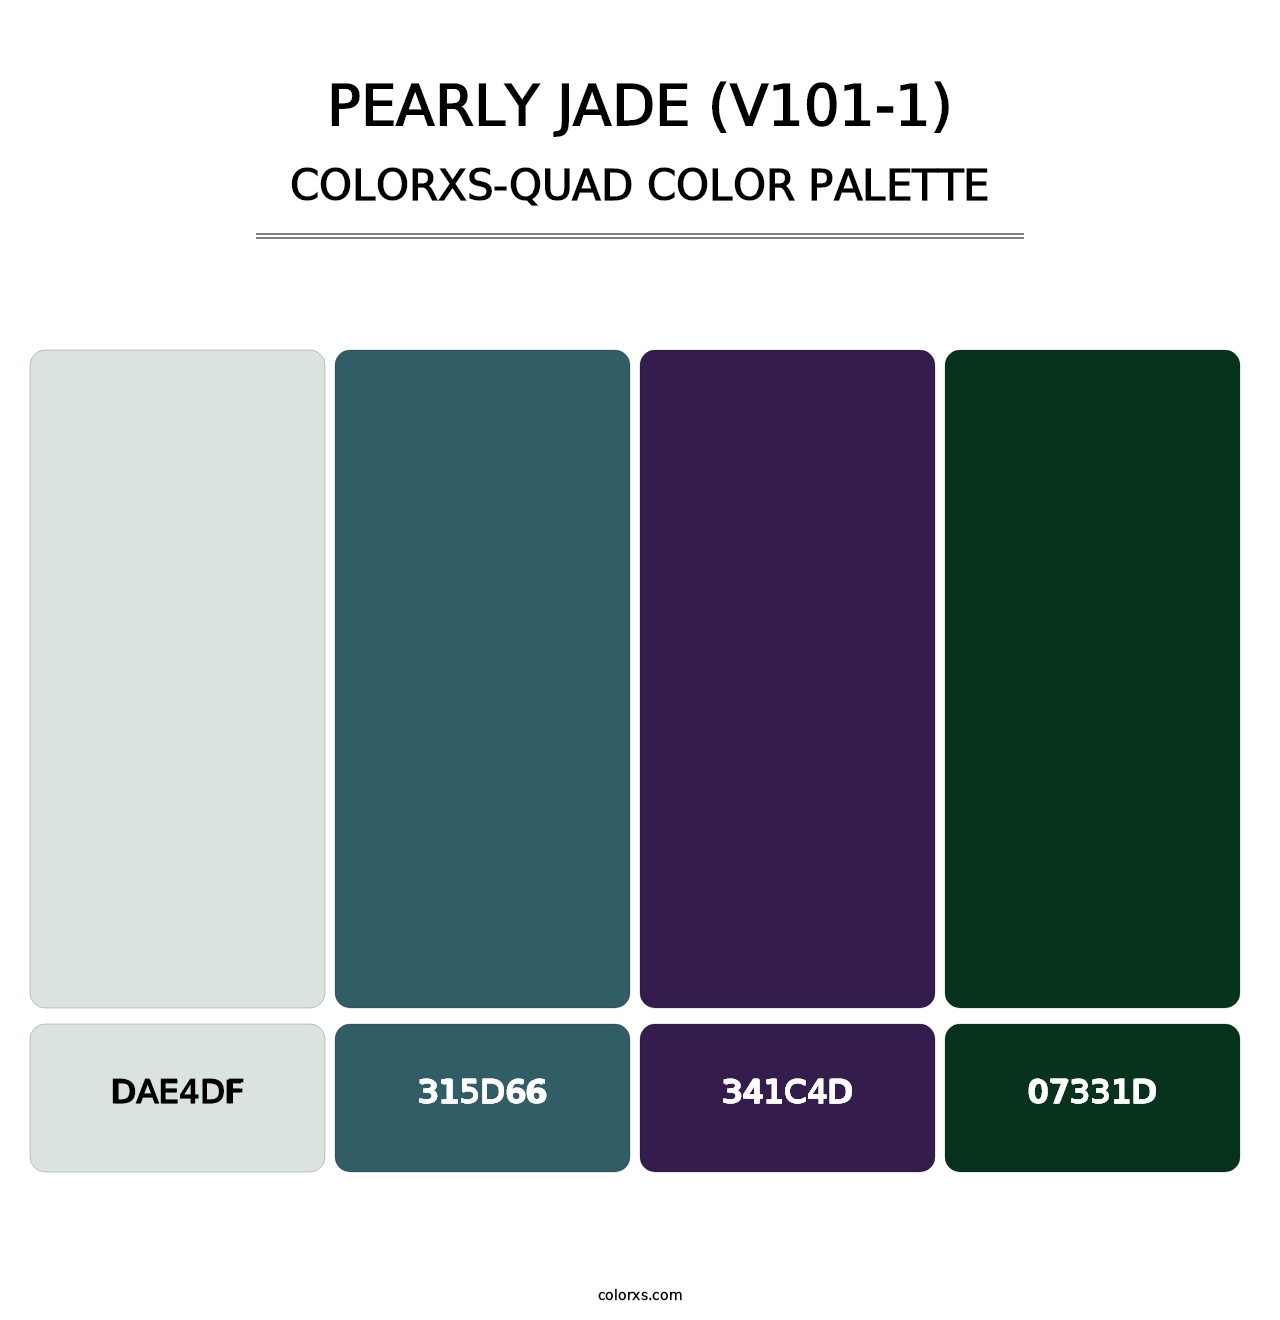 Pearly Jade (V101-1) - Colorxs Quad Palette